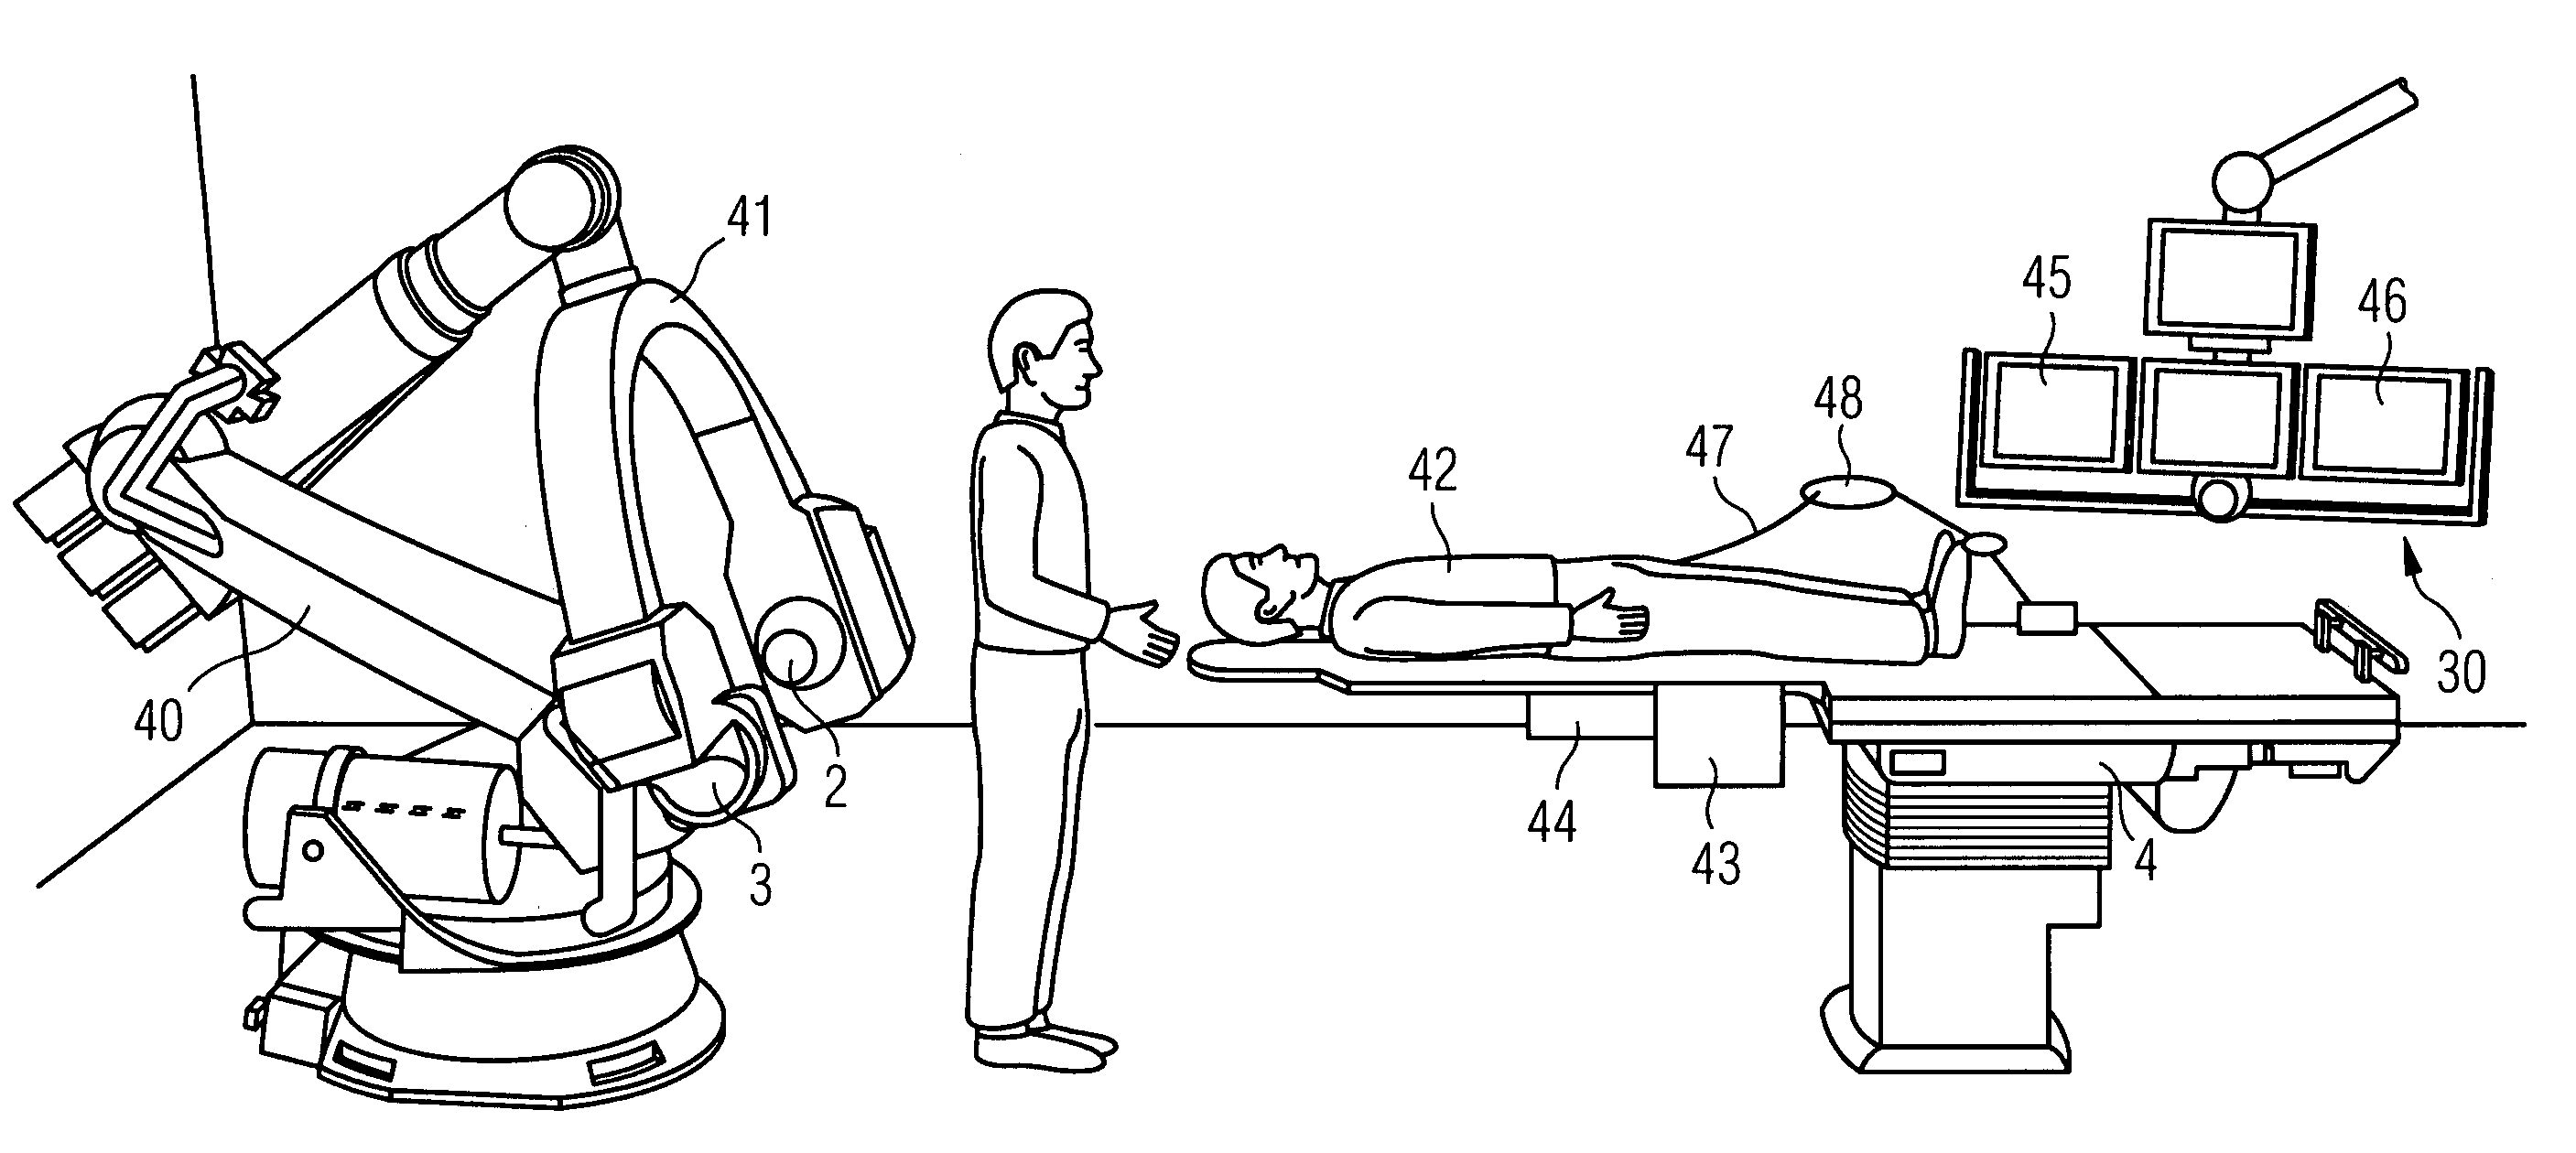 System for carrying out and monitoring minimally-invasive interventions